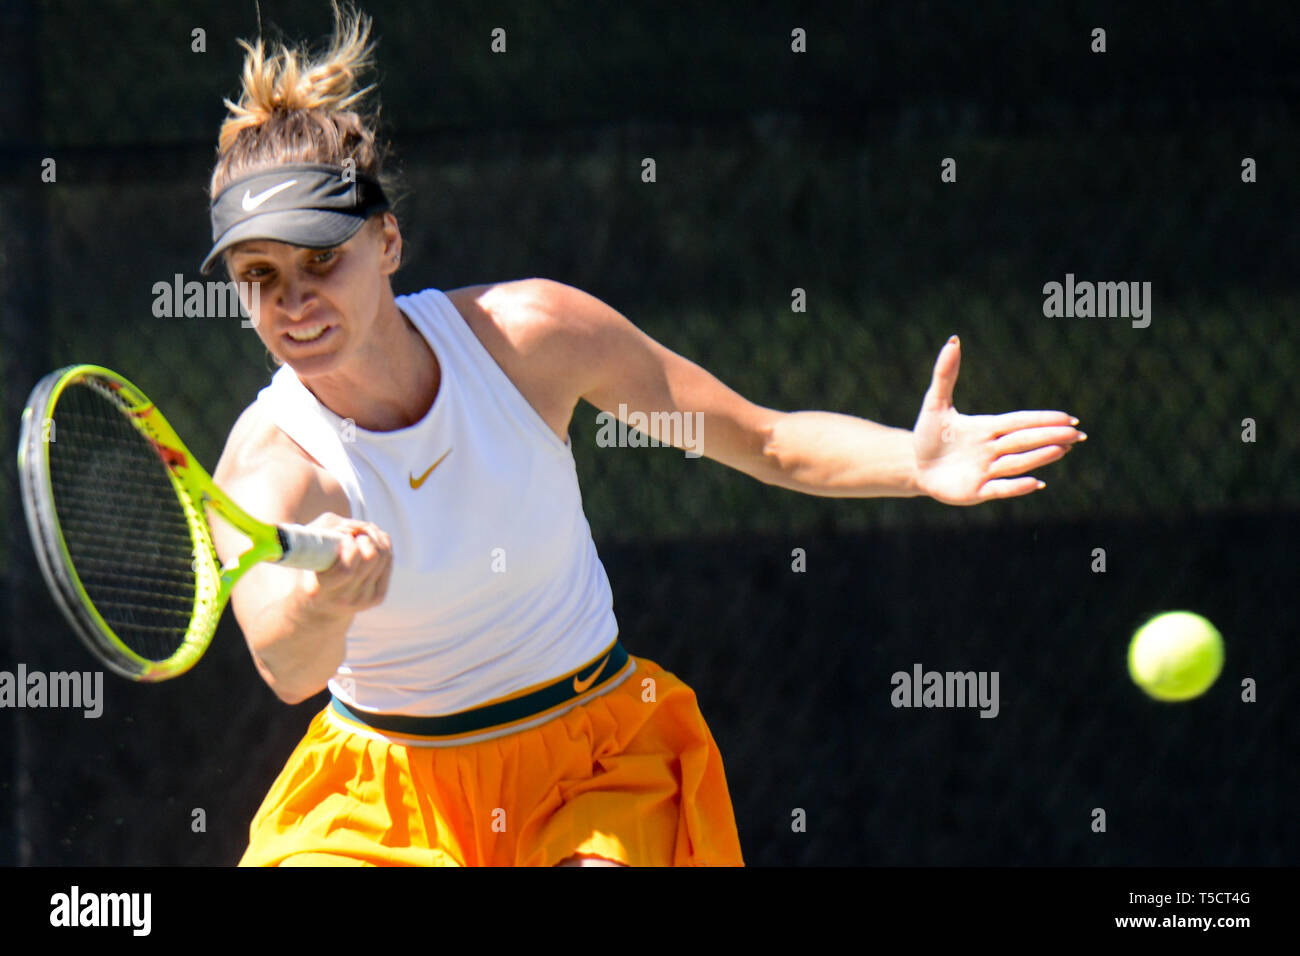 Charlottesvillle, Virginia, USA. 23rd Apr, 2019. SESIL KARATANTCHEVA of Bulgaria in action at the Boar's Head Resort Women's Open tennis tournament in Charlottesvillle Virgina. Credit: Christopher Levy/ZUMA Wire/Alamy Live News Stock Photo